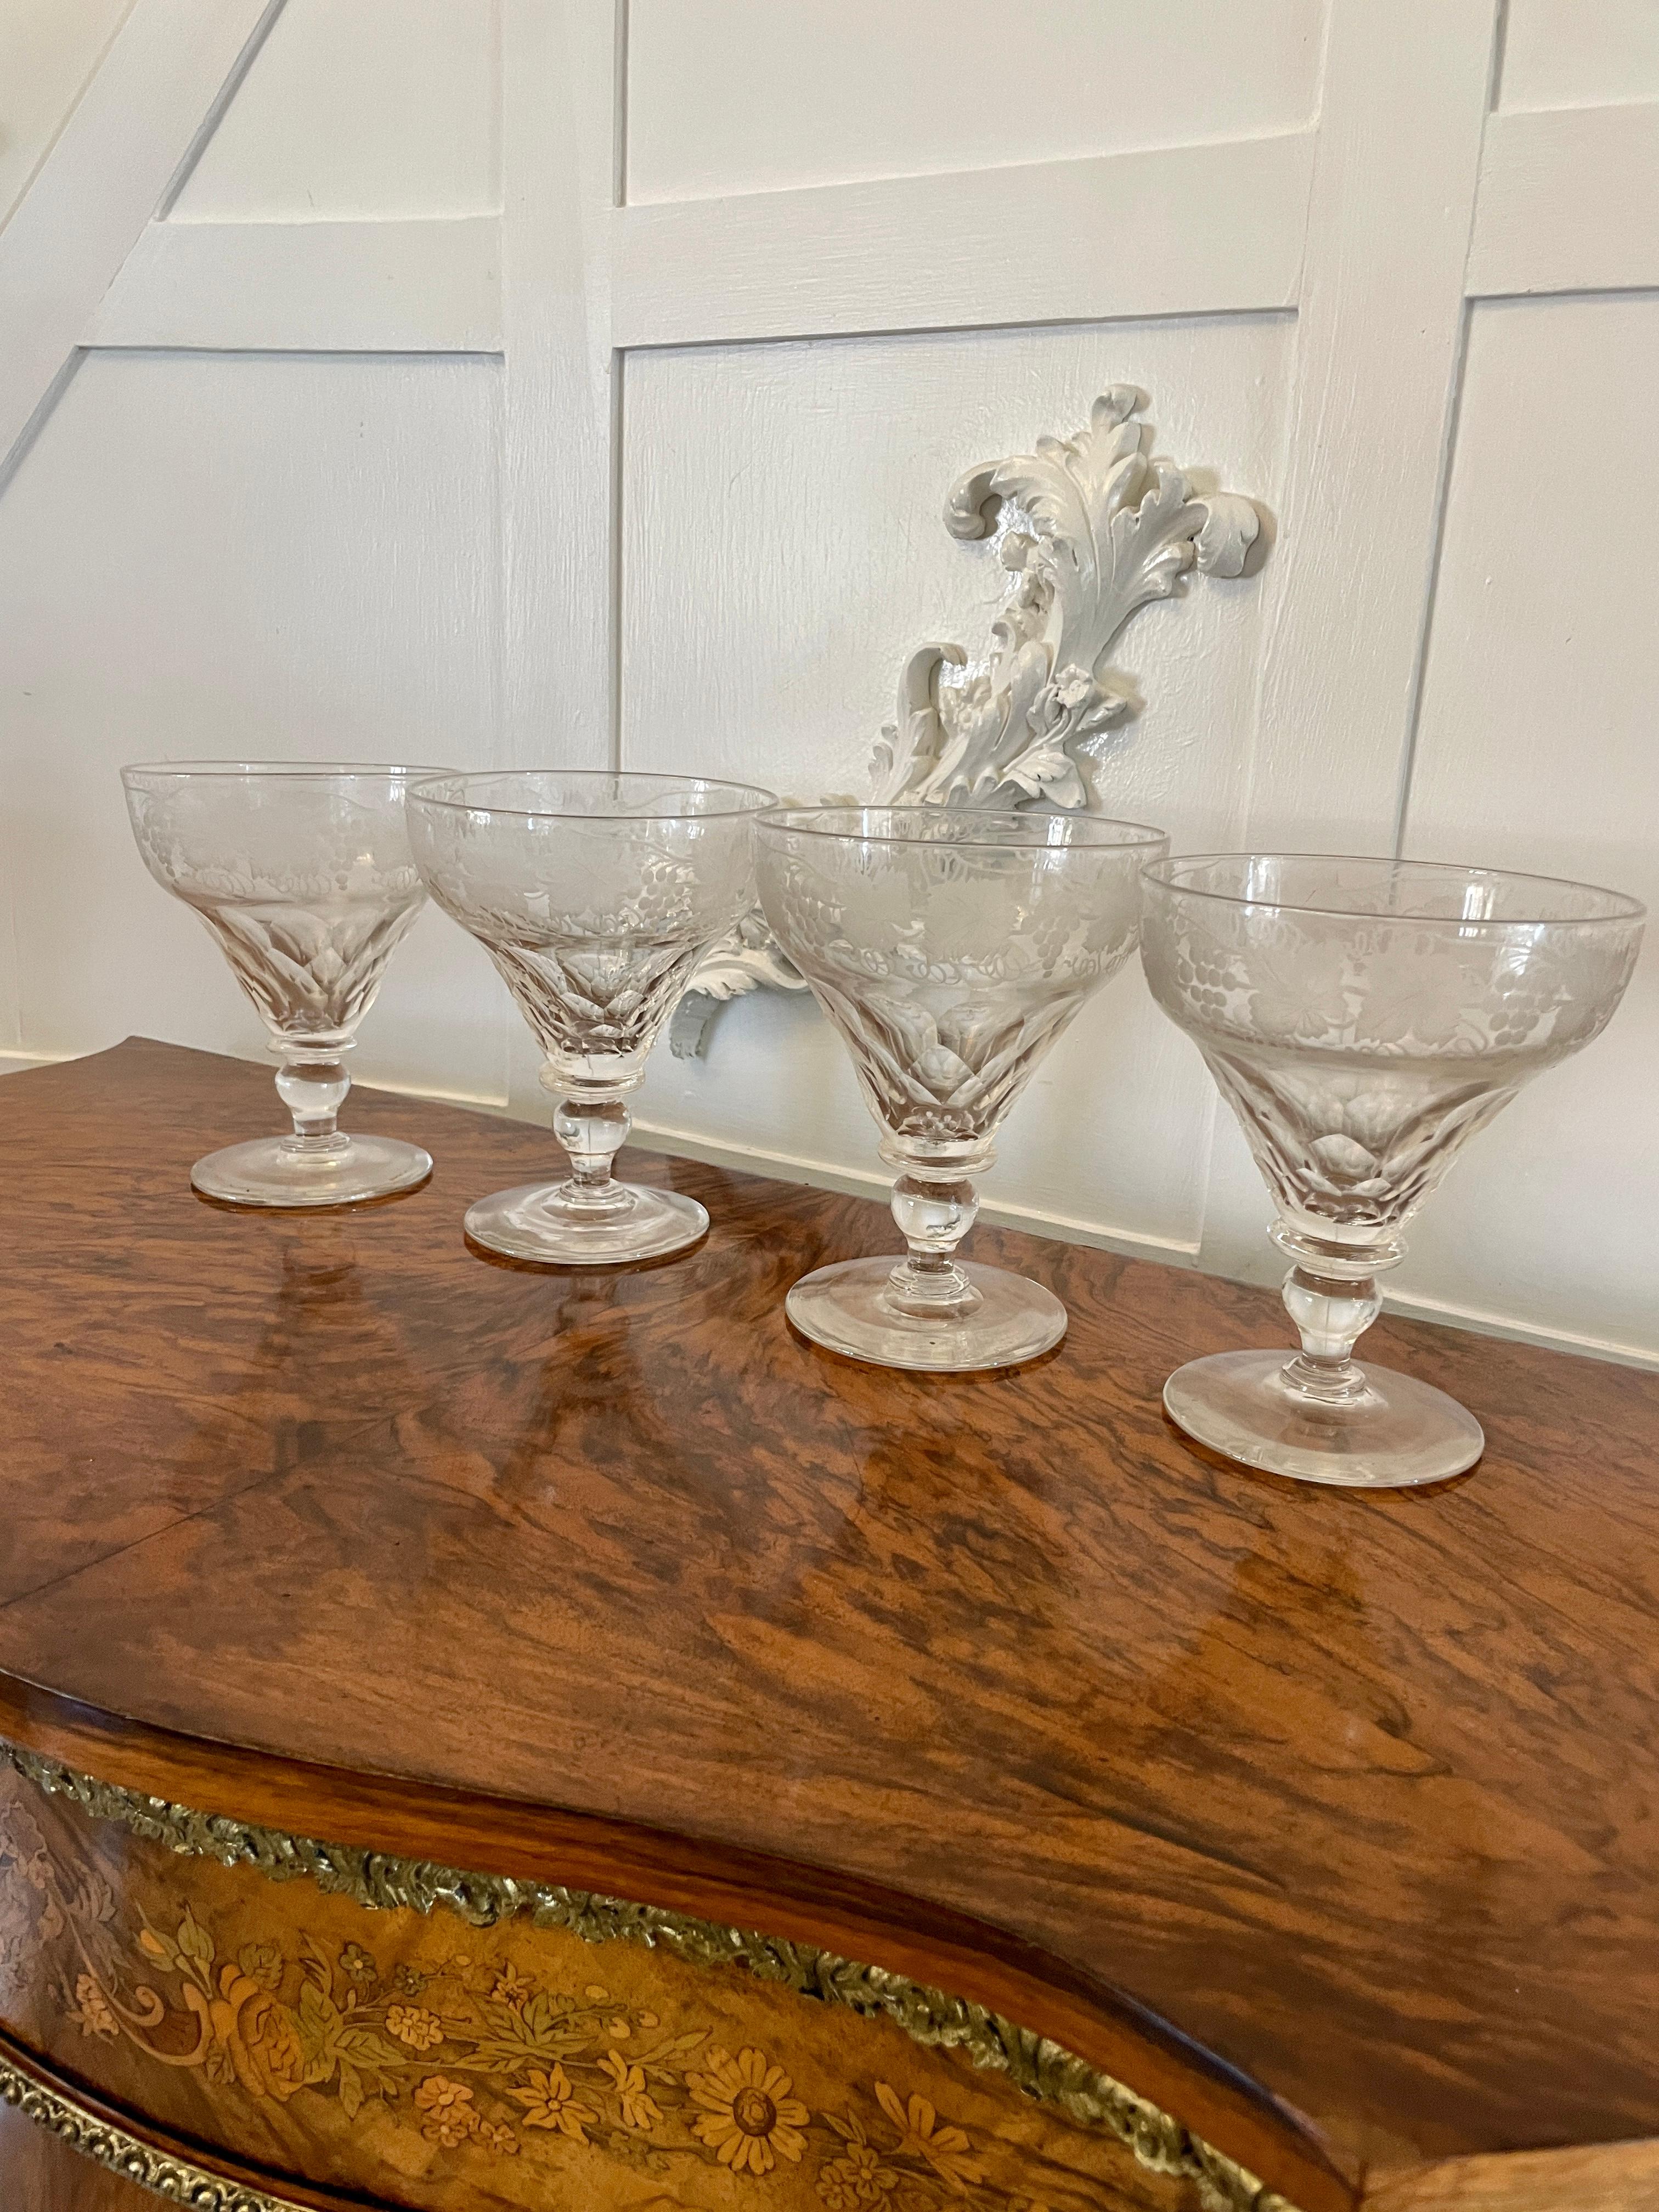 Unusual large set of 4 antique Victorian quality engraved glasses having quality engraved grapes and leaves standing on a circular base


In lovely original condition


Dimensions:
Height 17 cm
Width 13.5 cm
Depth 13.5 cm


Dated 1860 
